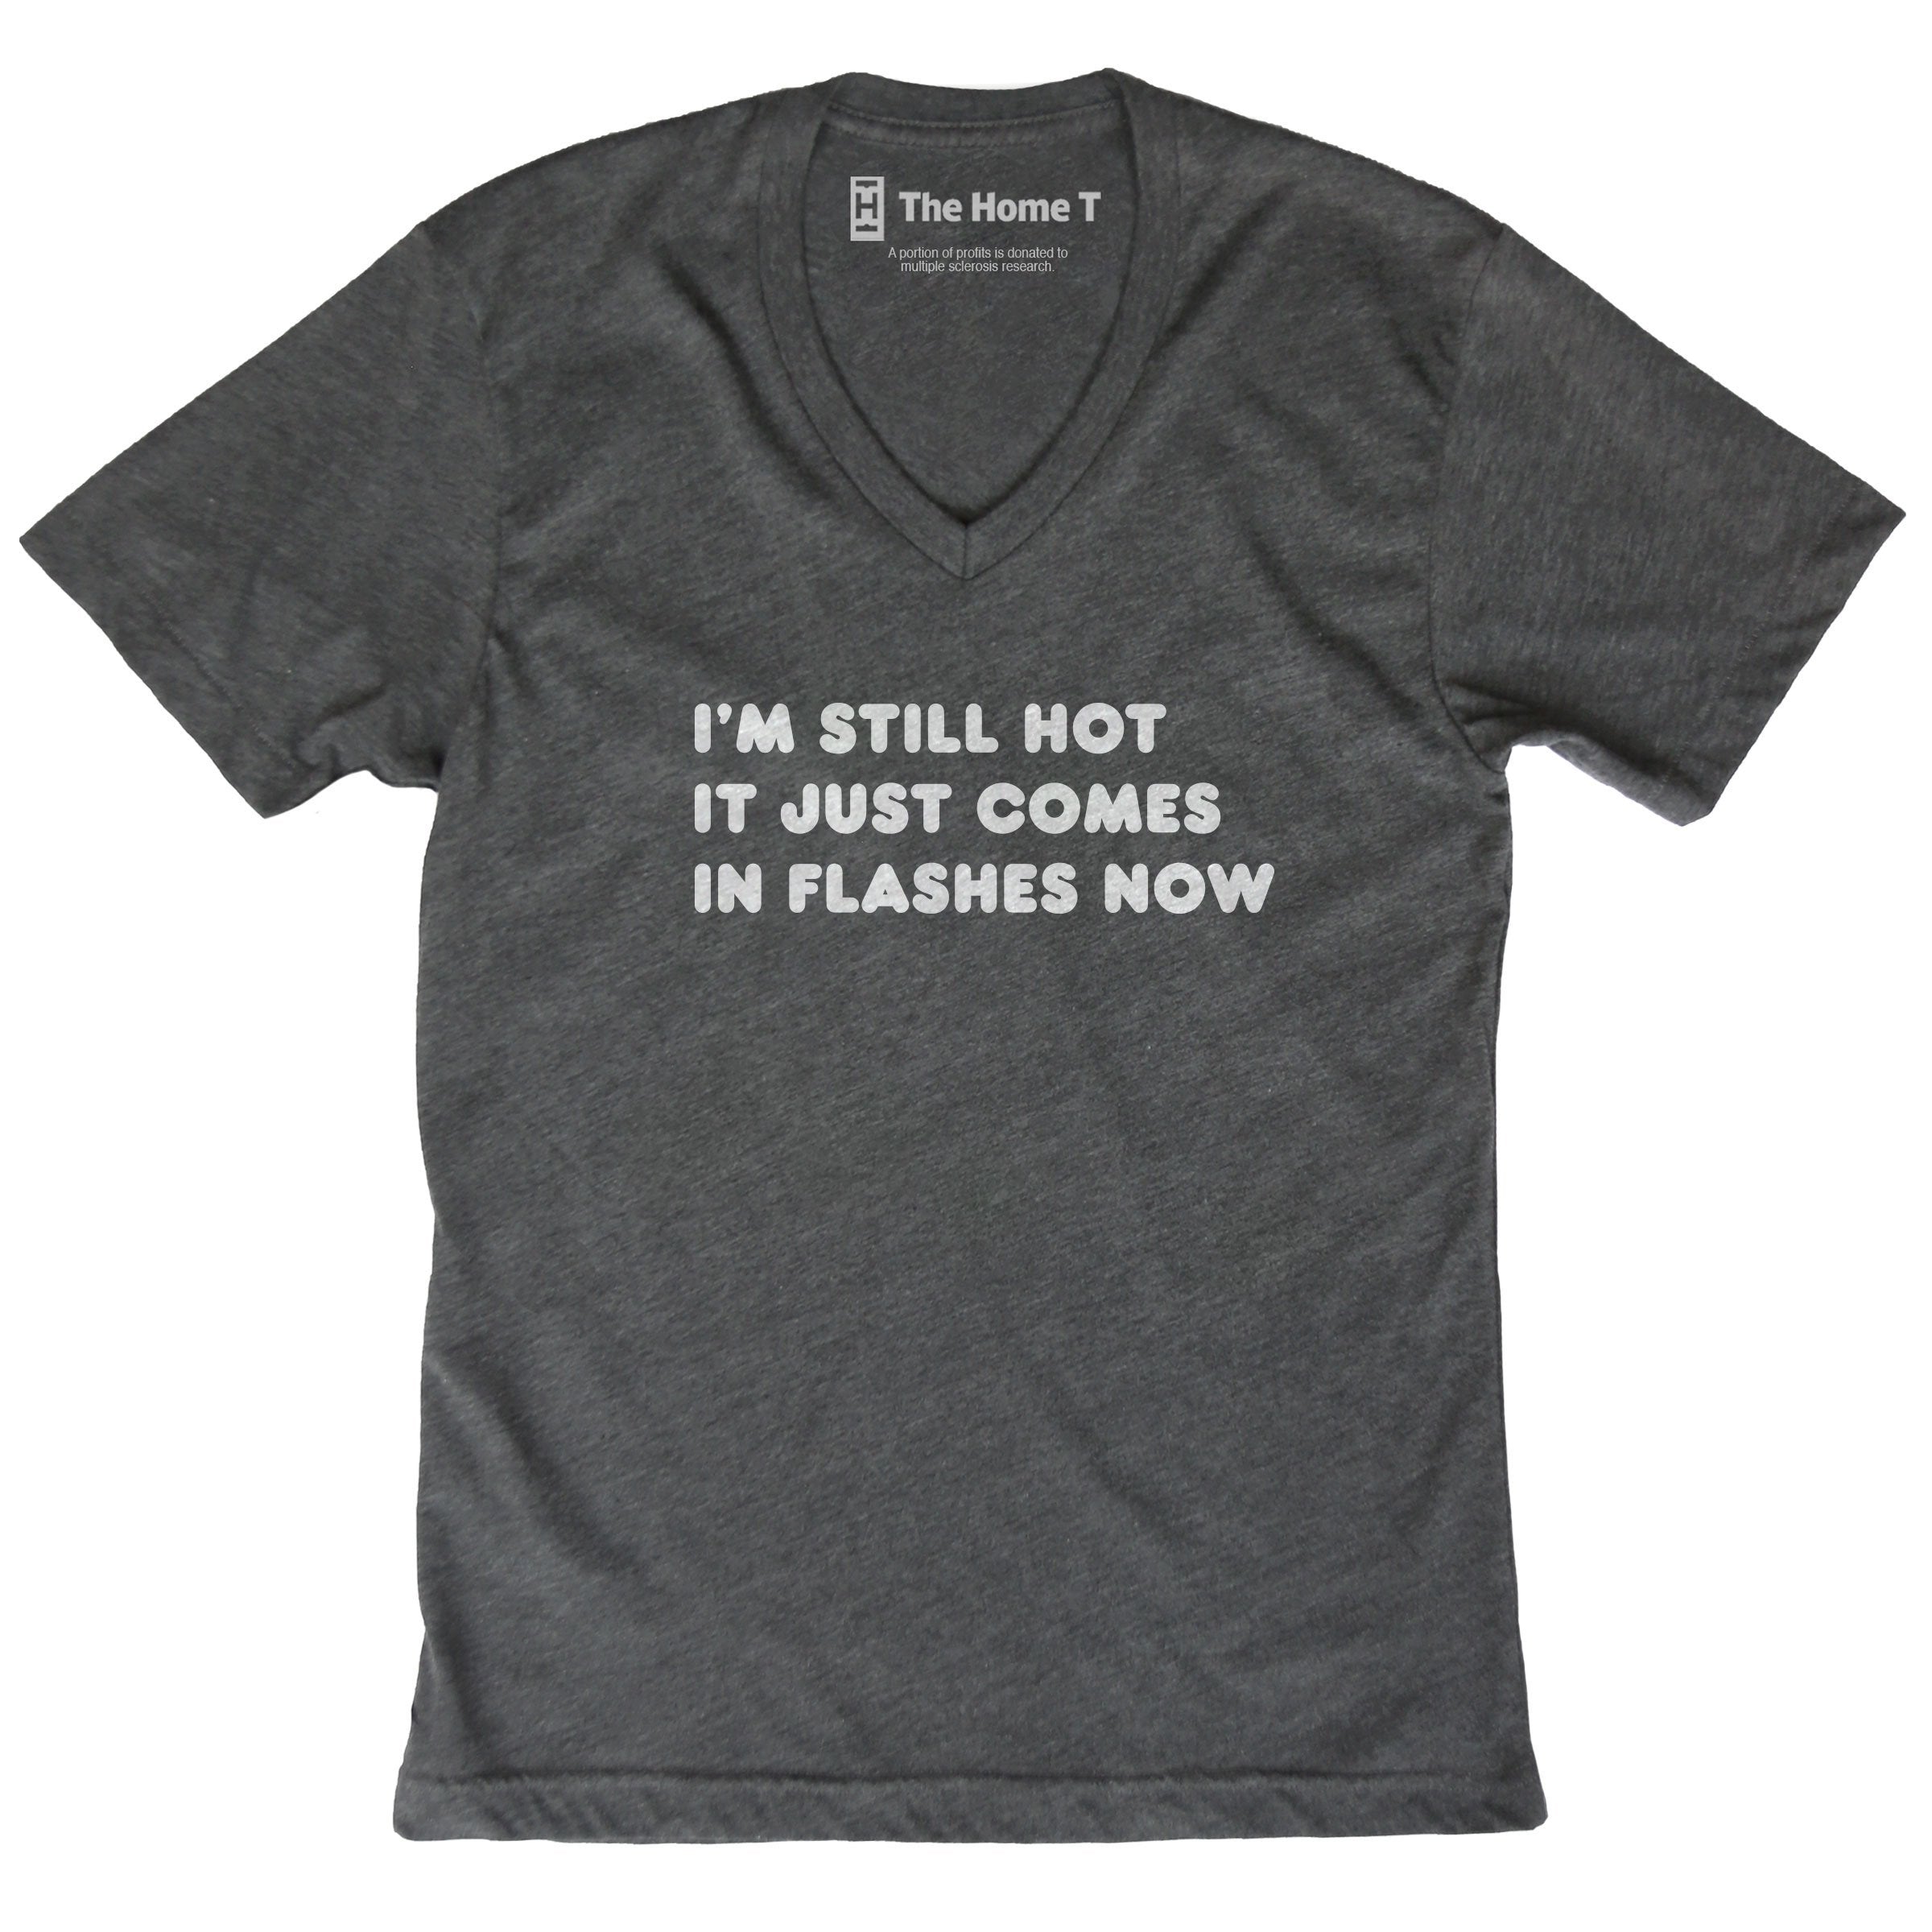 Hot Flashes